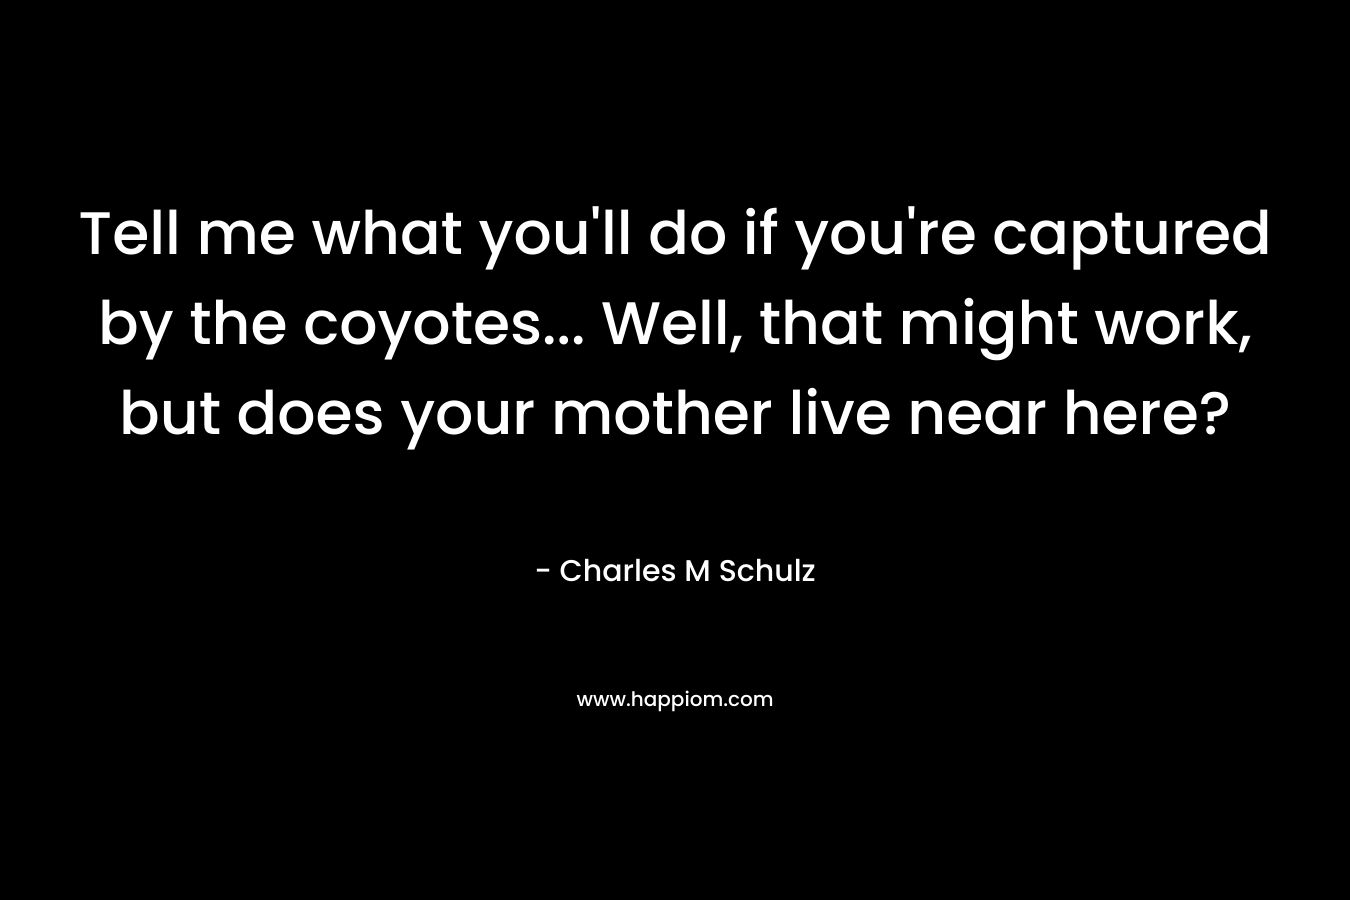 Tell me what you’ll do if you’re captured by the coyotes… Well, that might work, but does your mother live near here? – Charles M Schulz